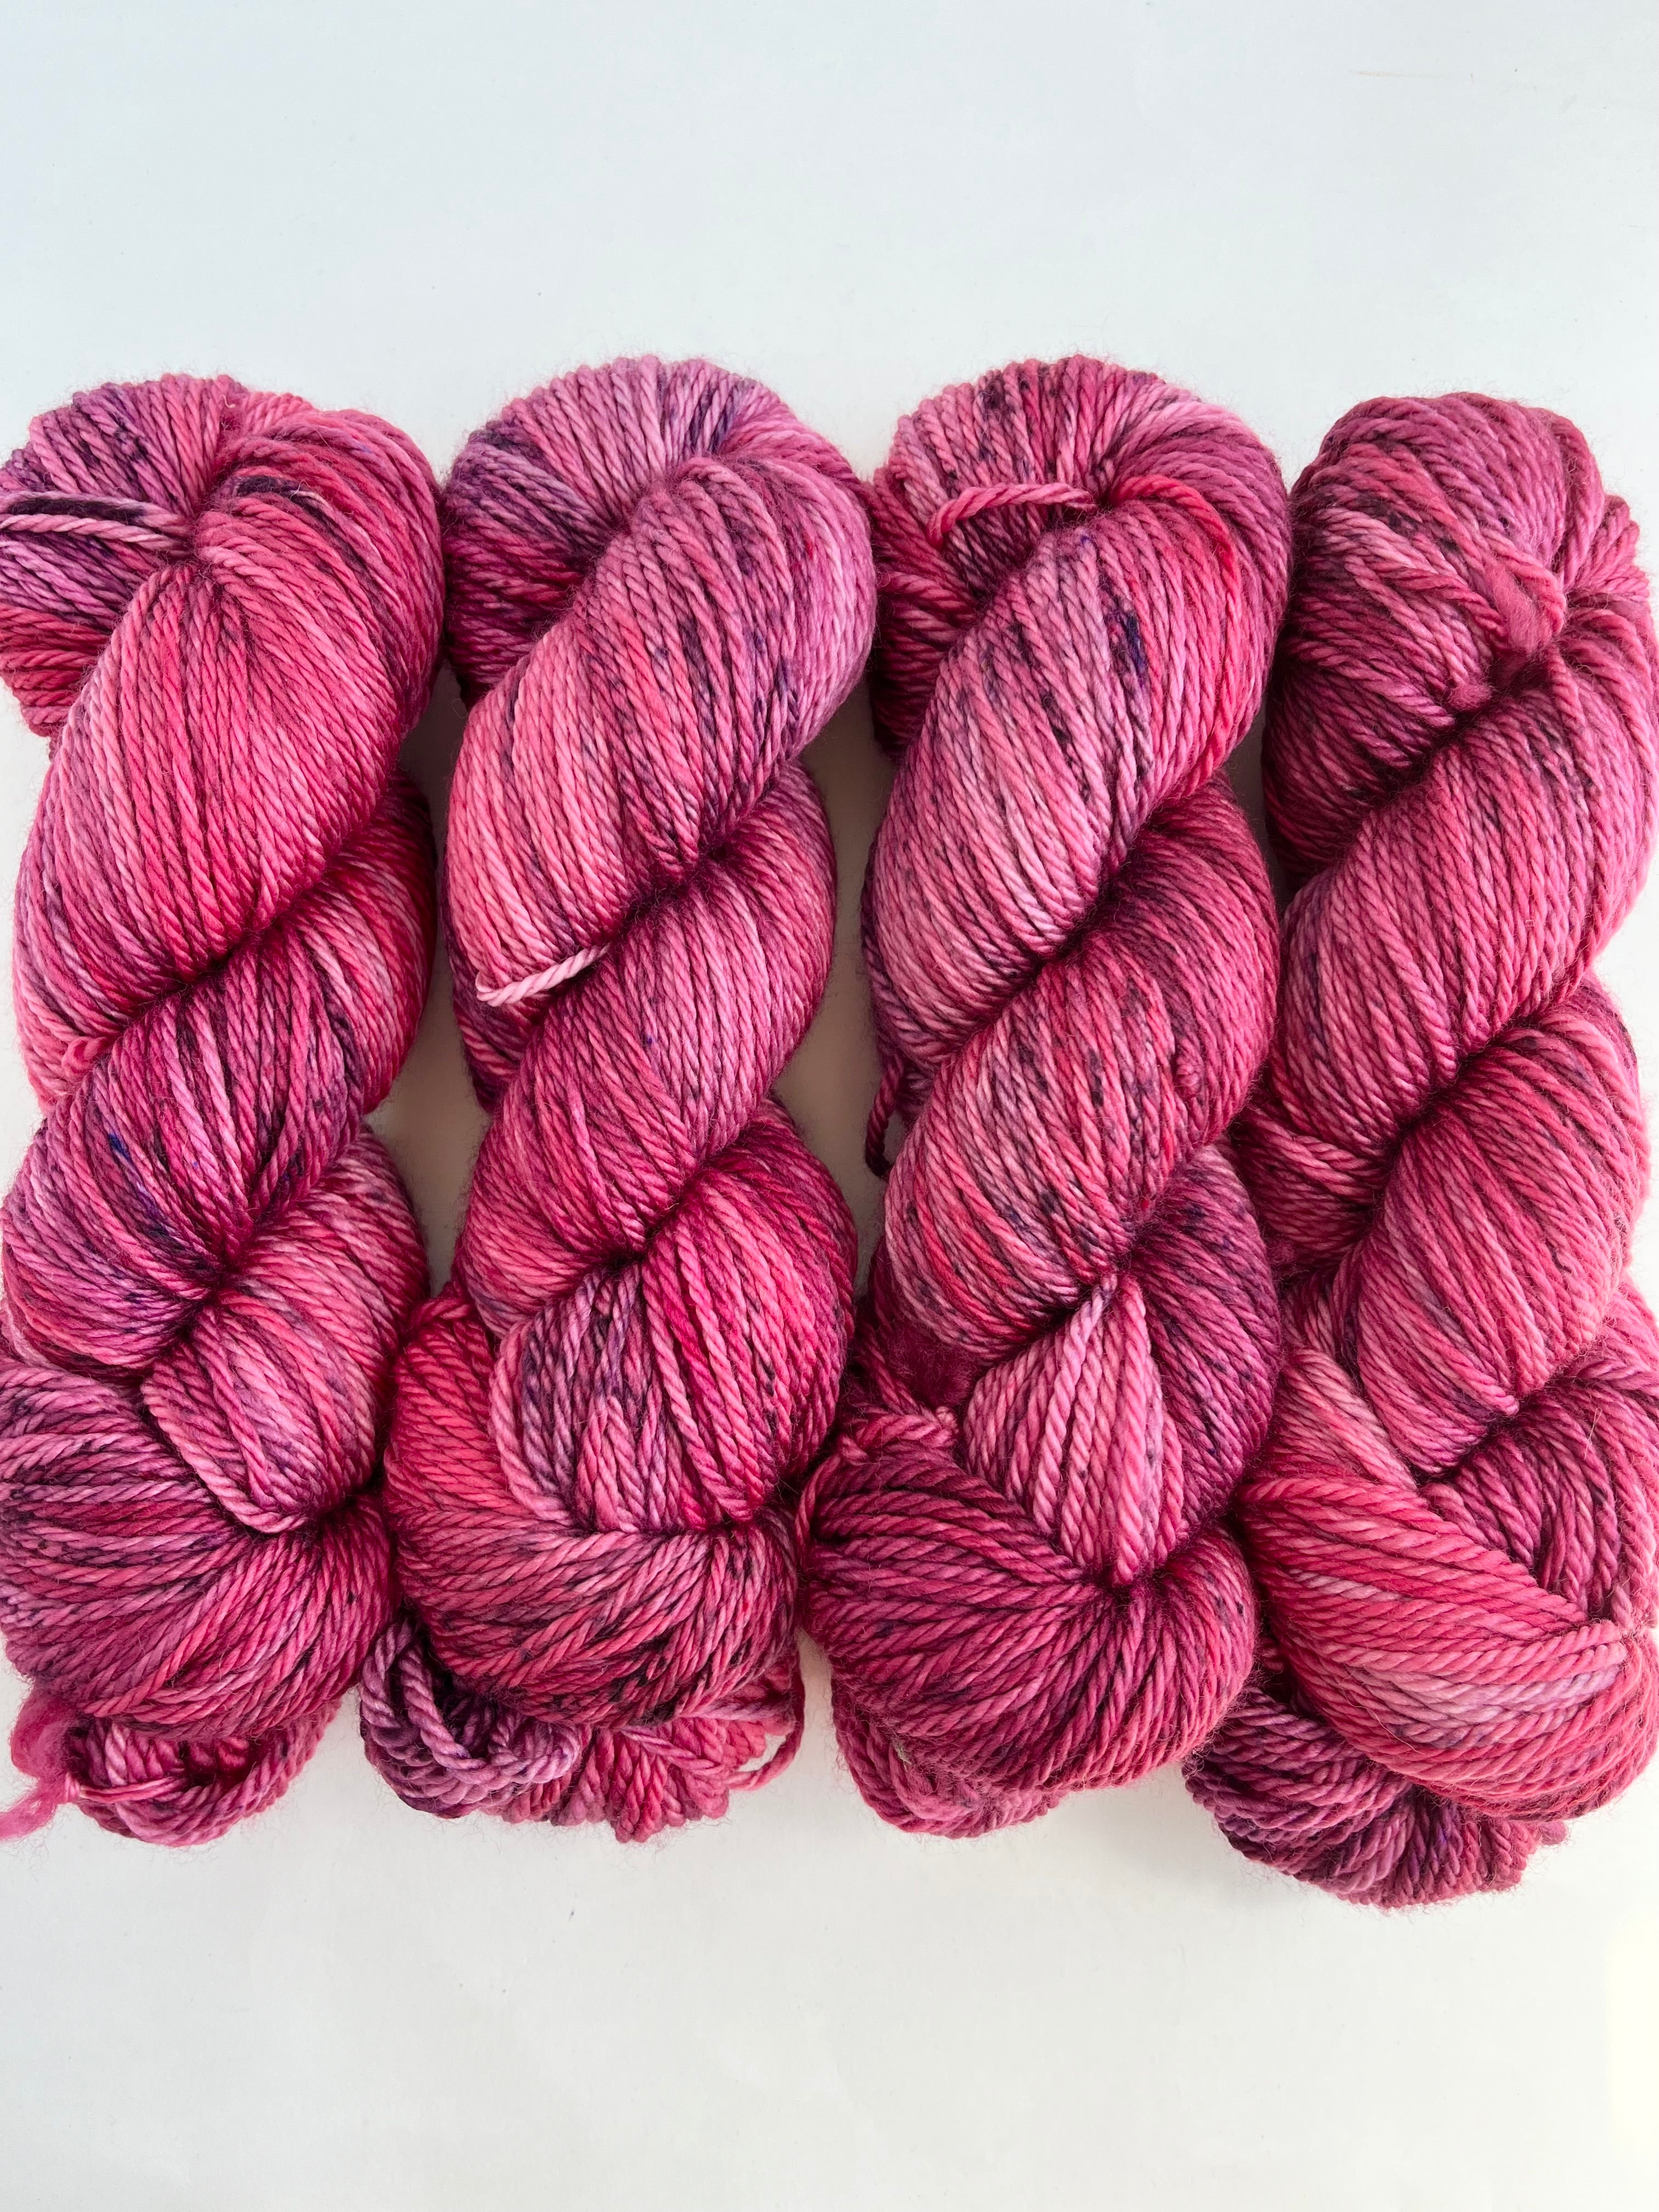 Summer Berries - Tributary Worsted